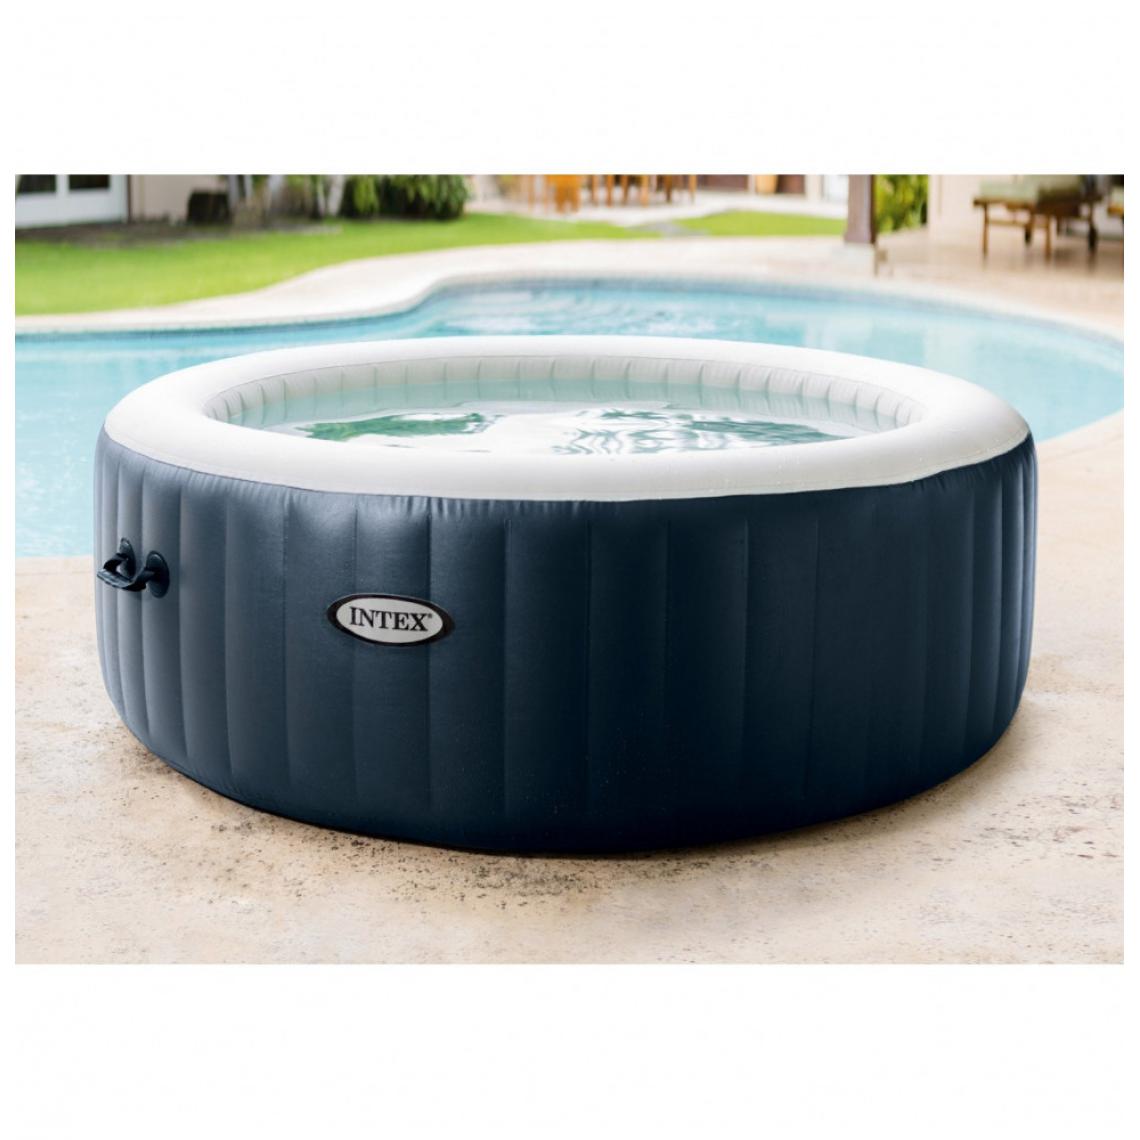 Intex - Spa gonflable new blue navy 4 places Intex - Spa gonflable